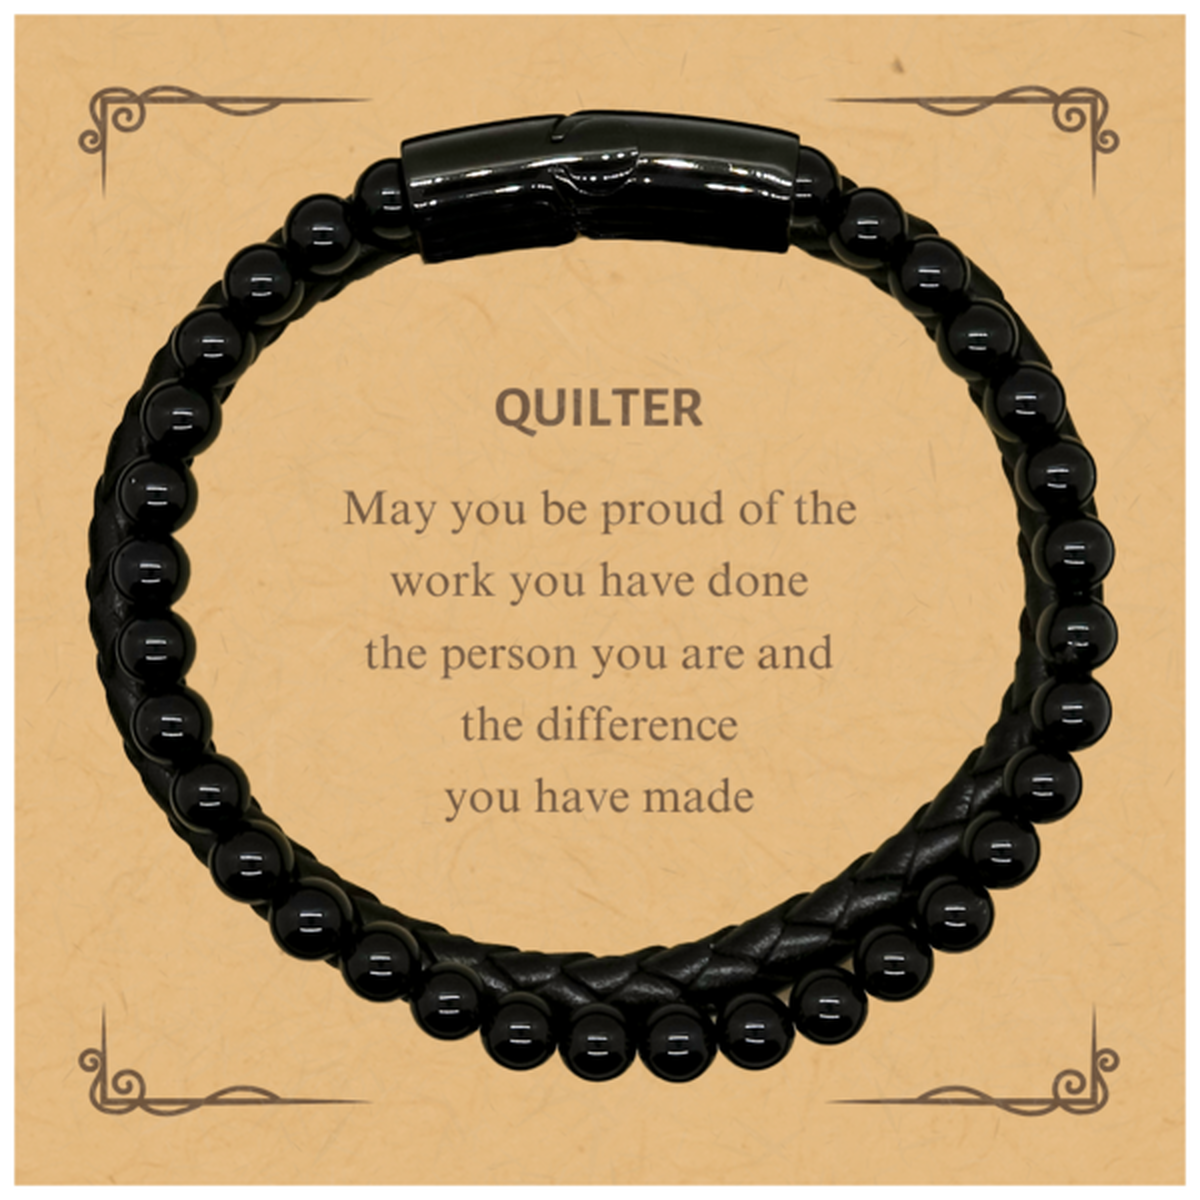 Quilter May you be proud of the work you have done, Retirement Quilter Stone Leather Bracelets for Colleague Appreciation Gifts Amazing for Quilter